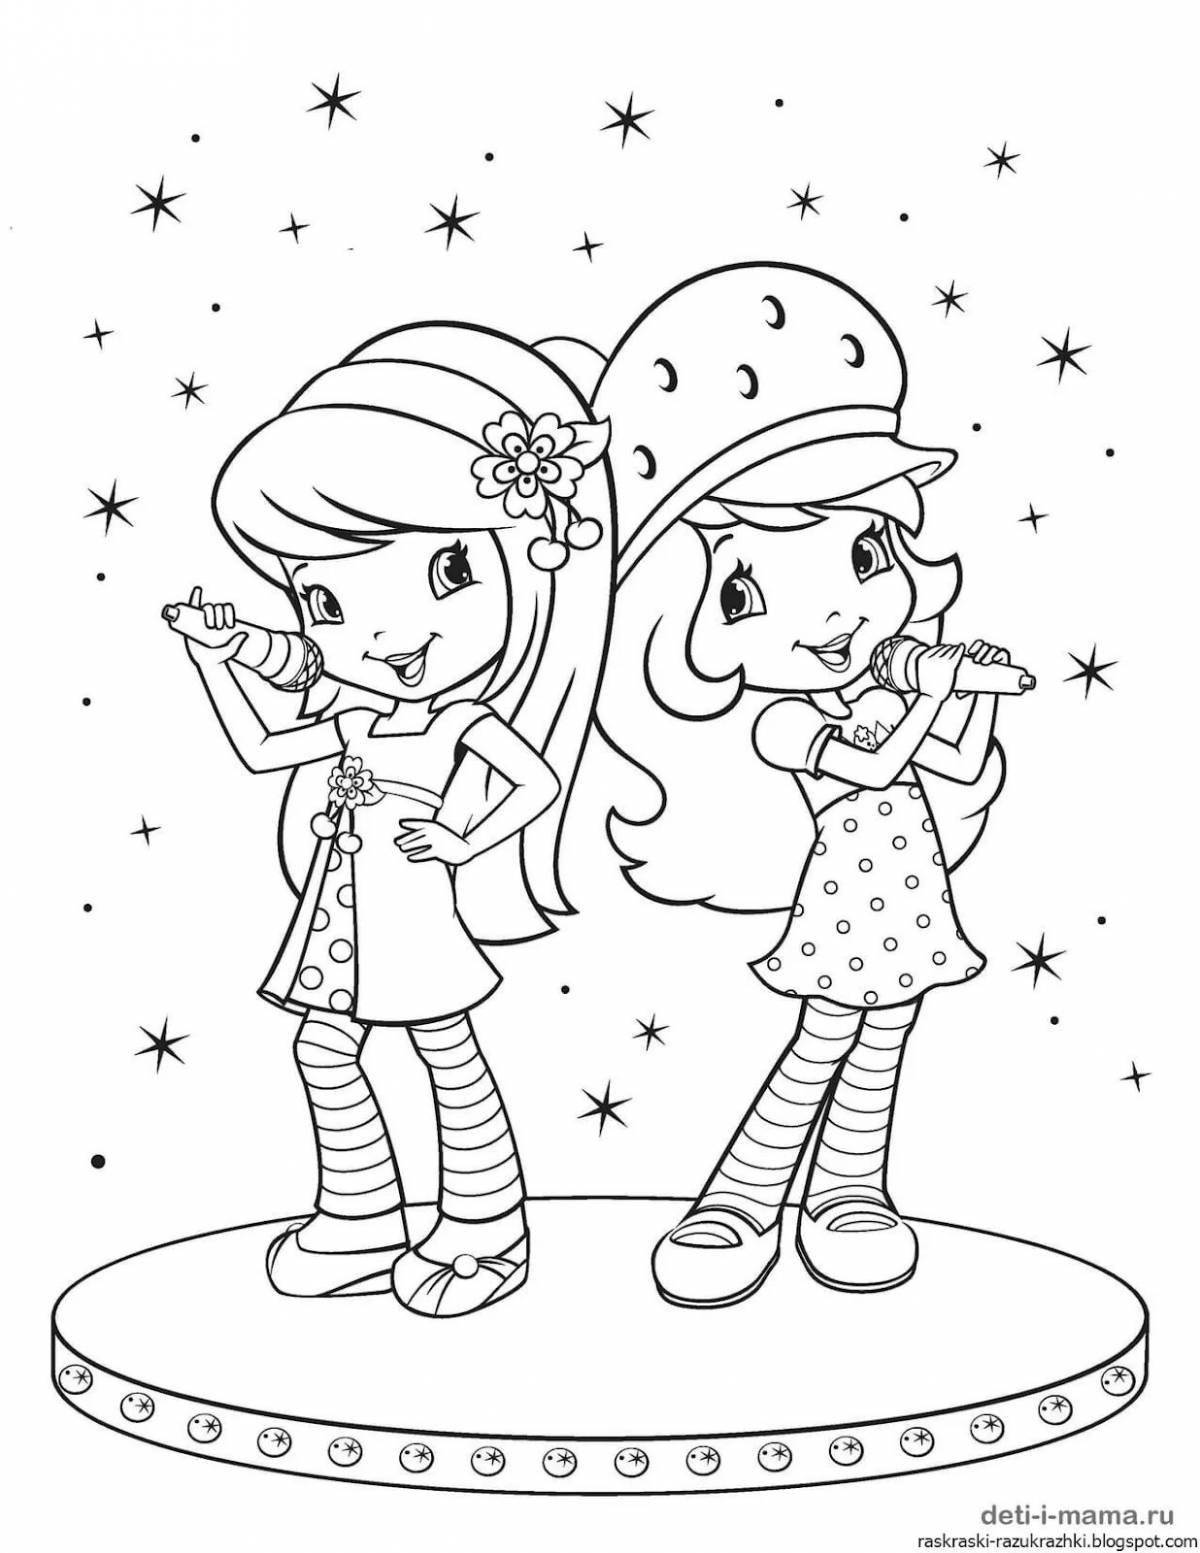 Glorious Charlotte Strawberry coloring pages for girls